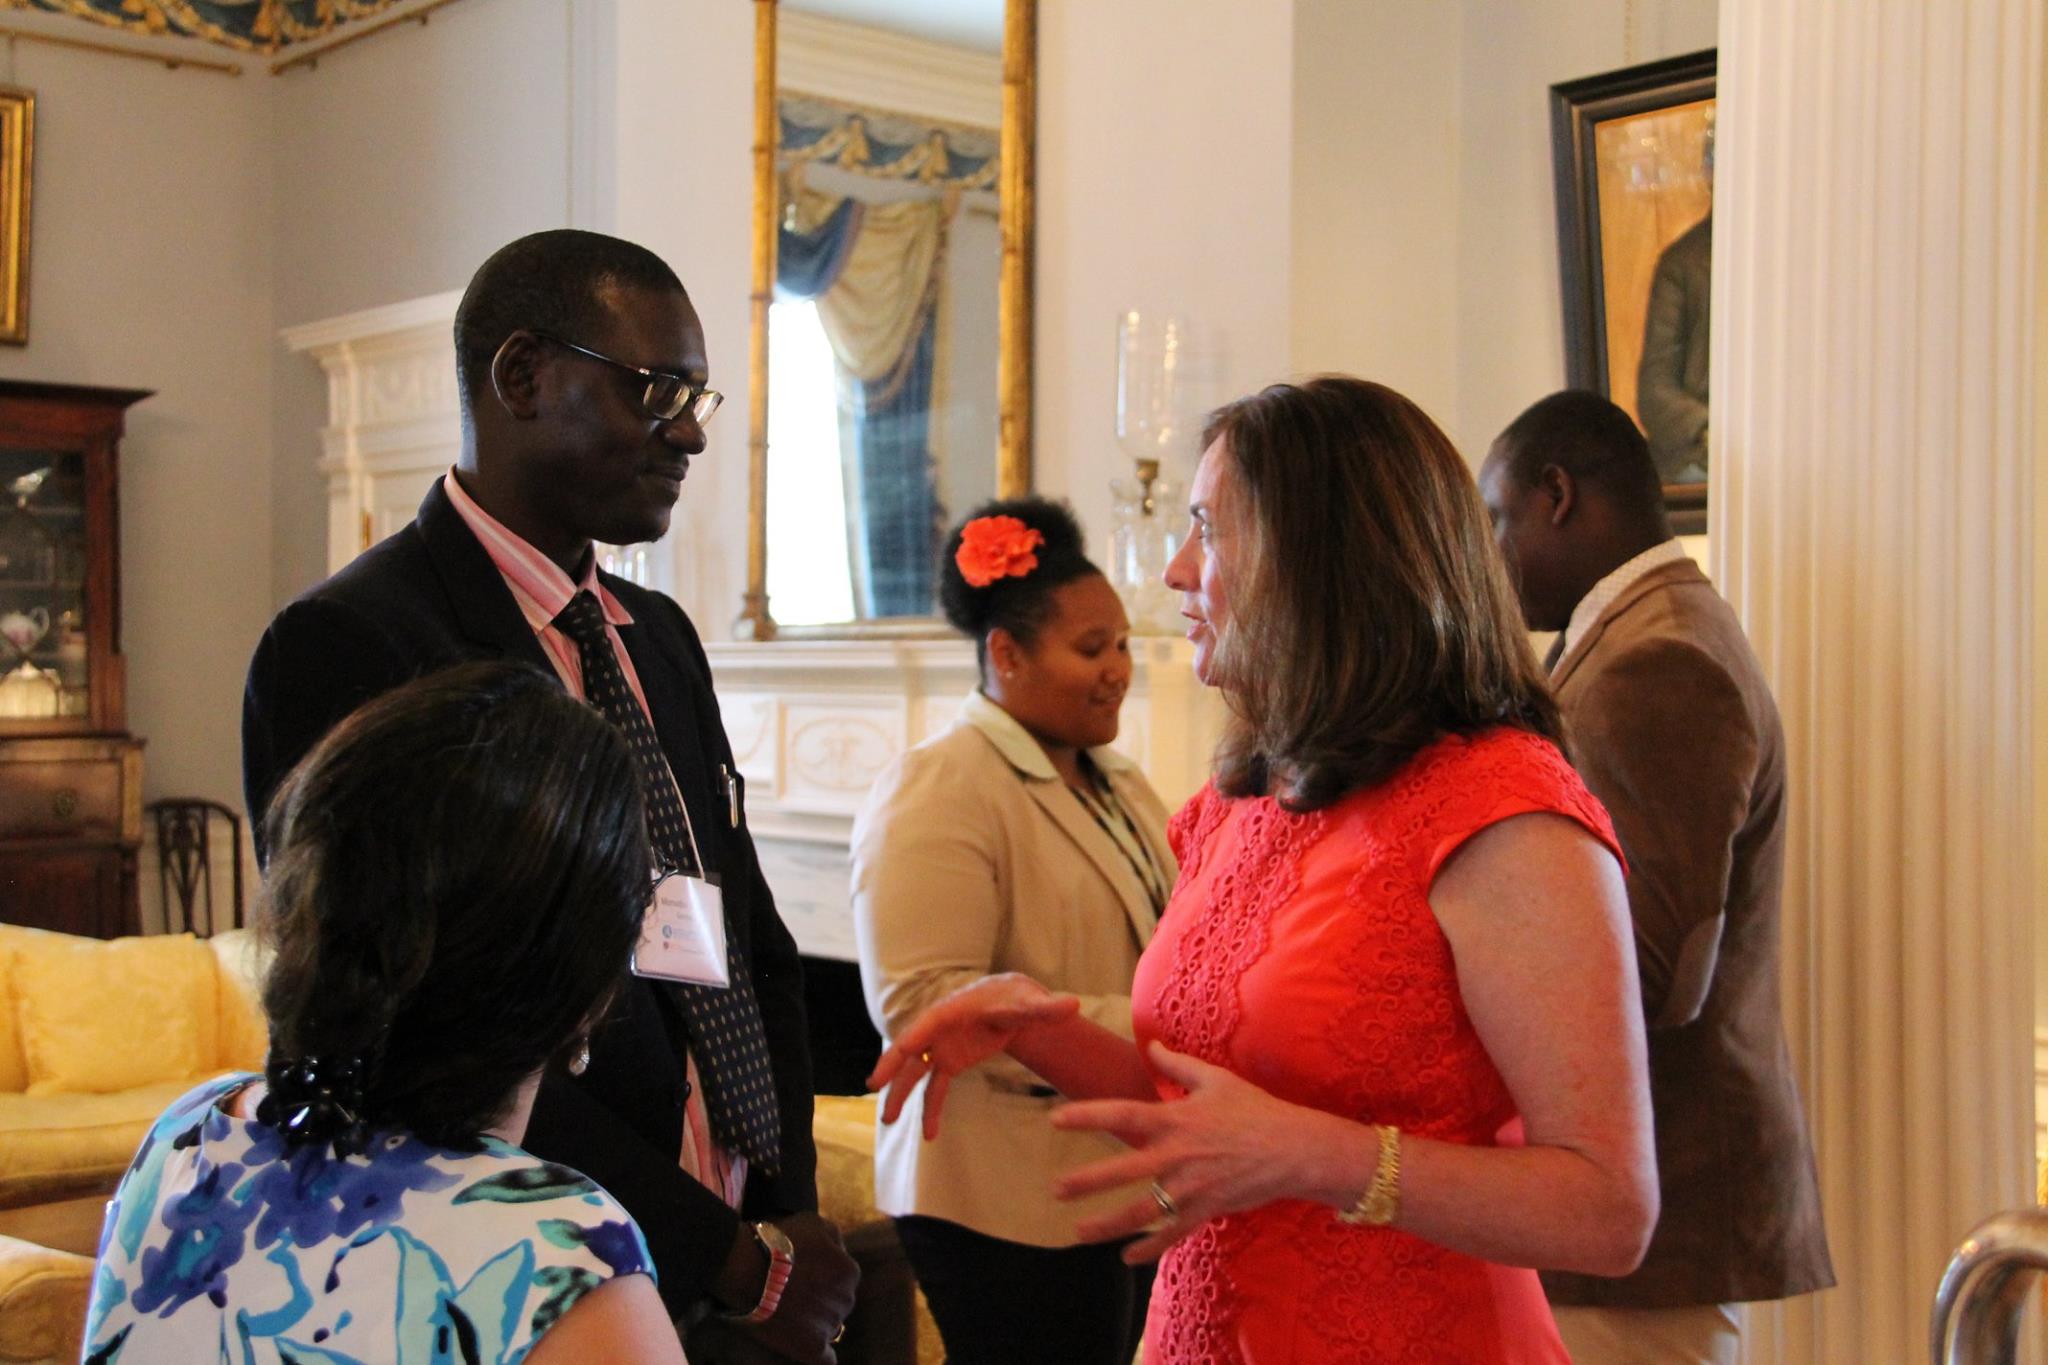 First Lady of Virginia, Dorothy McAuliffe, chats with members of the 2015 cohort of Mandela Washington Fellows.